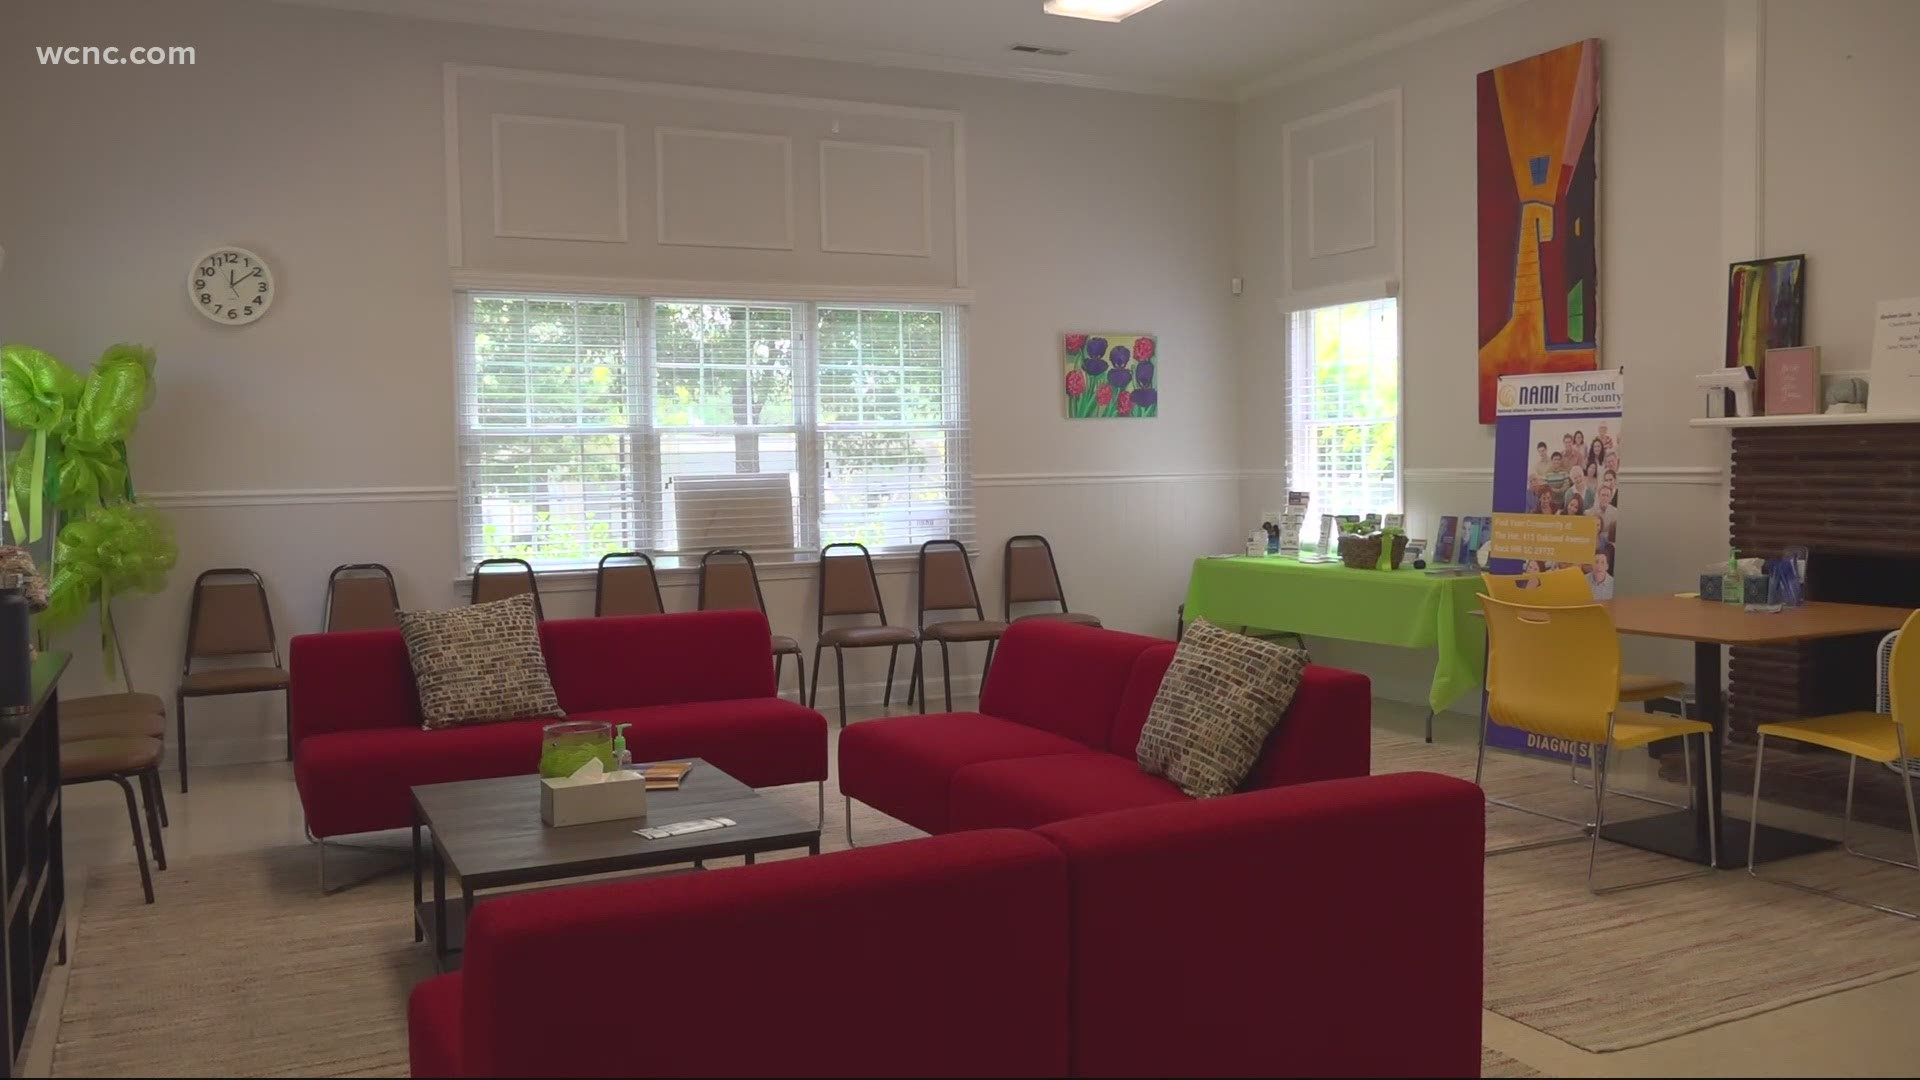 The drop-in center will fully open in Rock Hill when its safe to gather in groups. It's where people living with mental health challenges can be themselves.